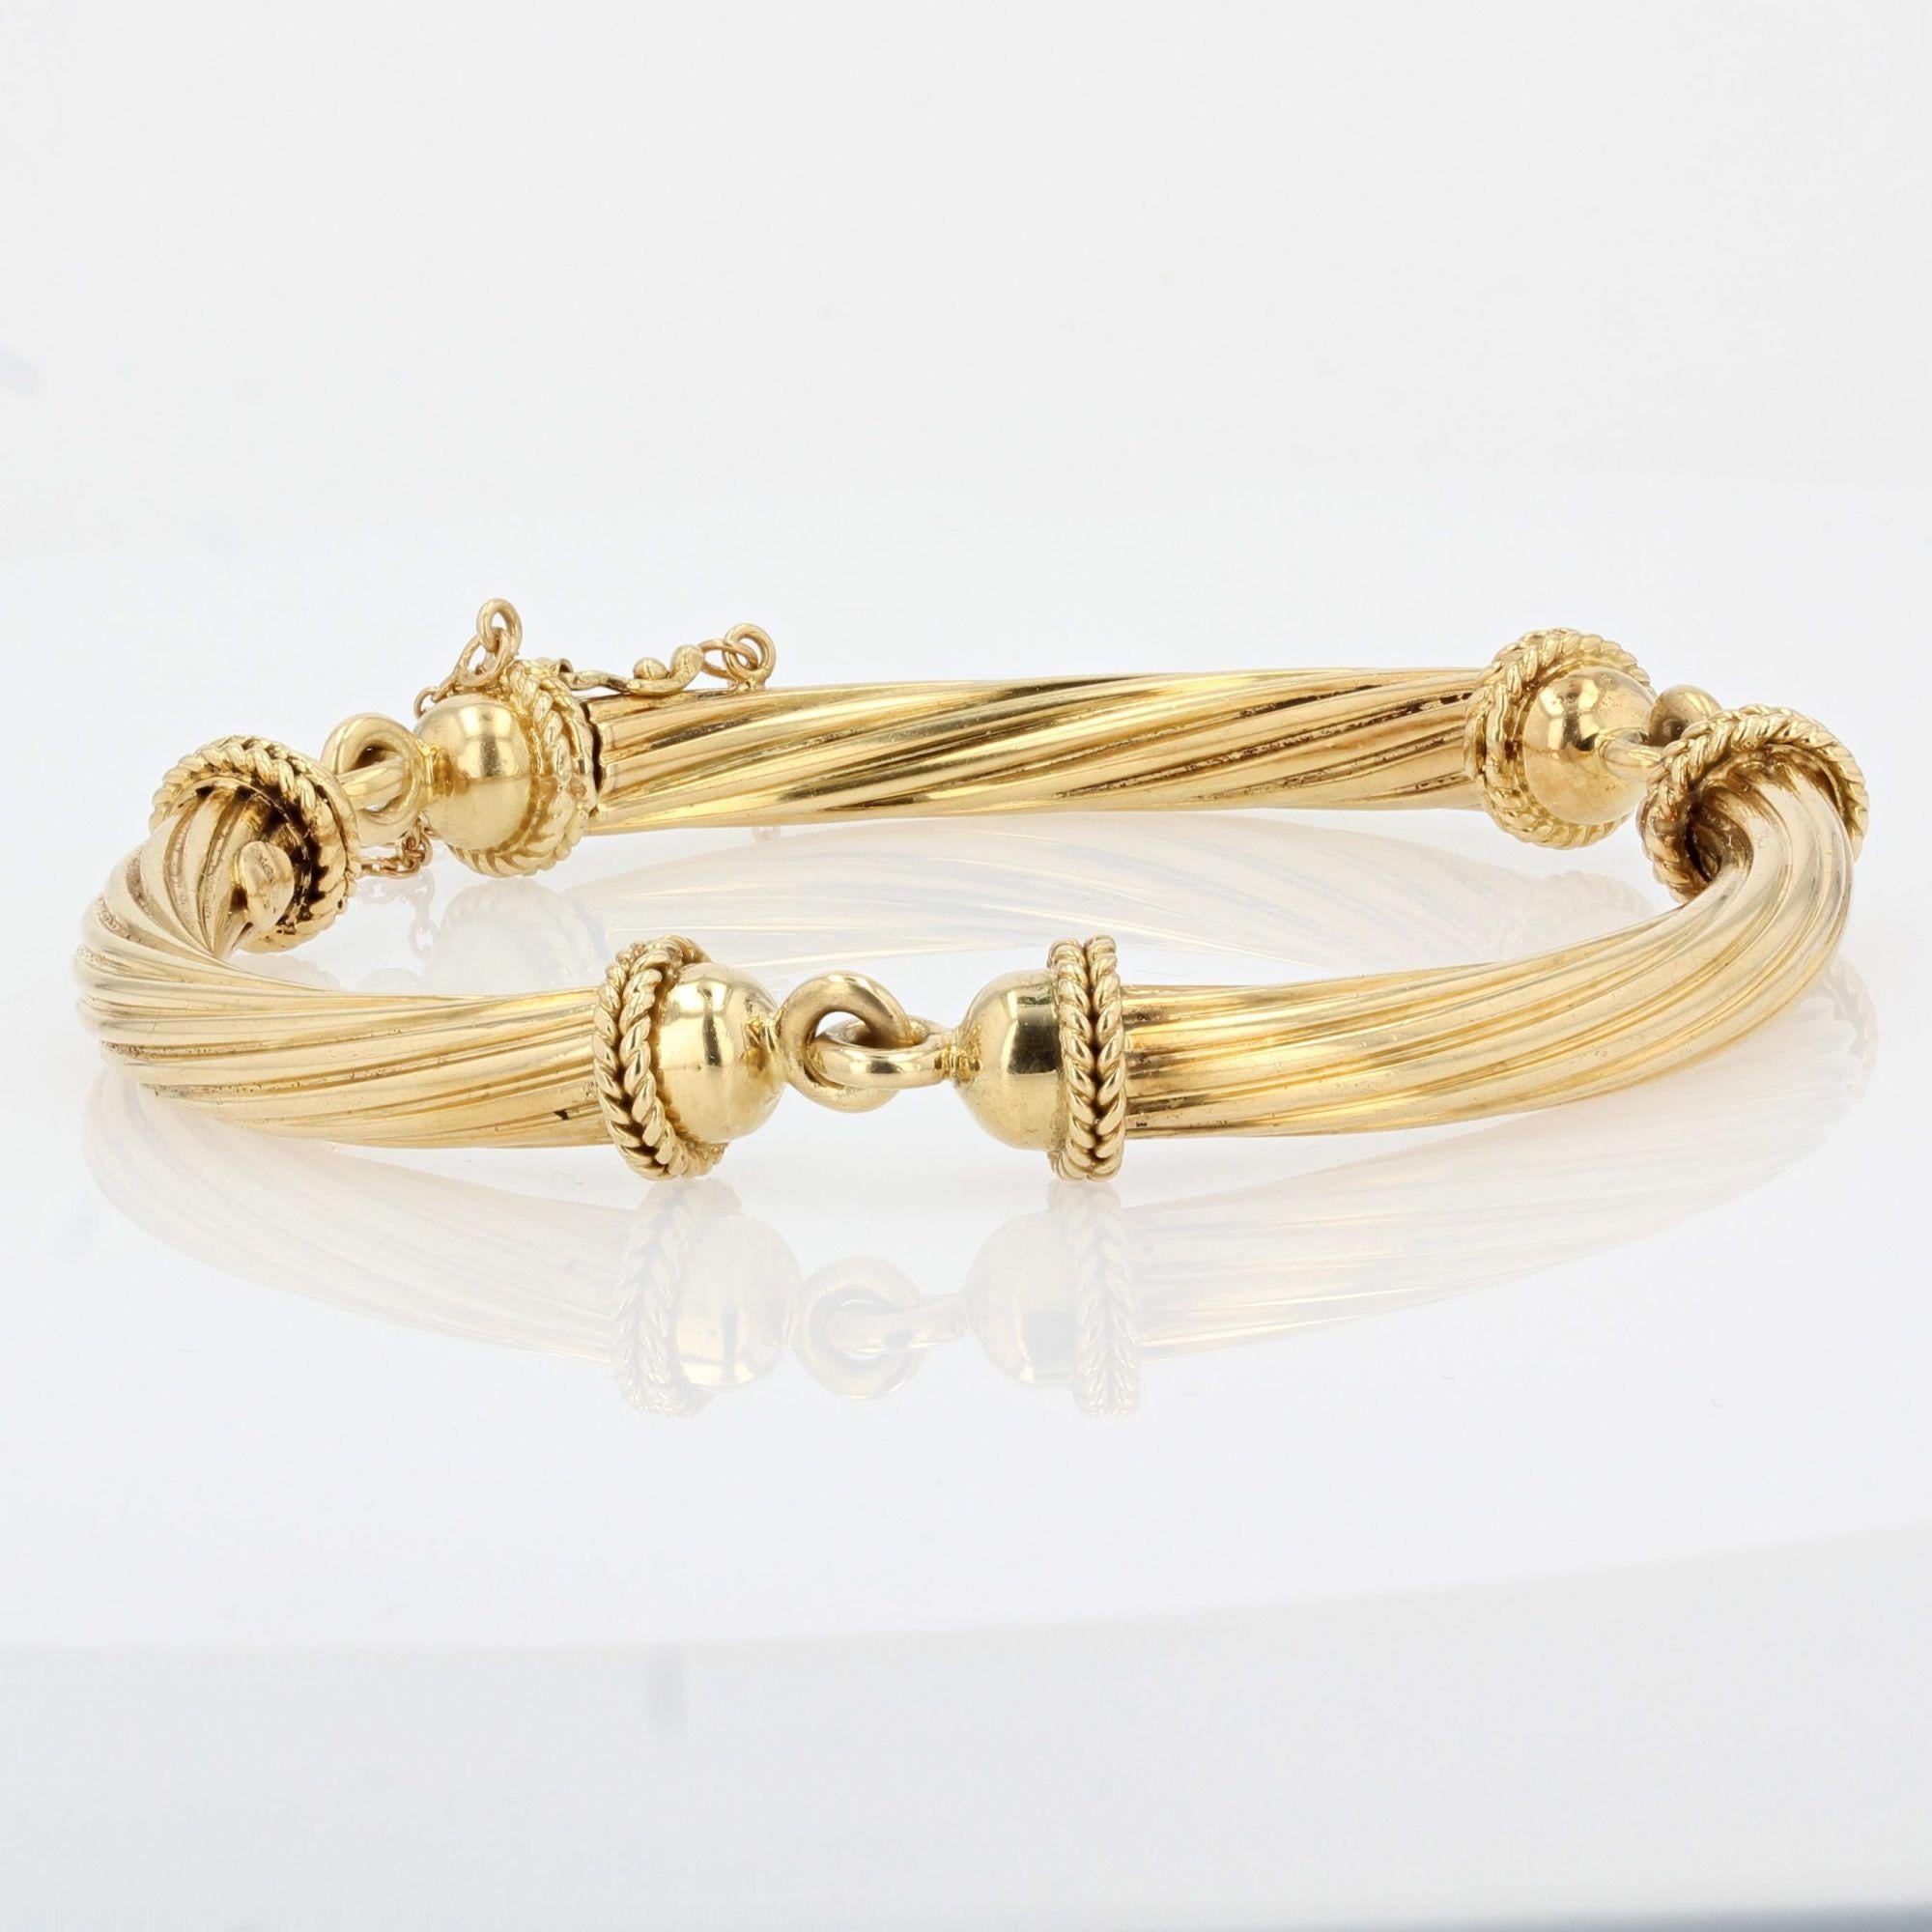 1960s 18 Karat Yellow Gold Articulated Bangle Bracelet For Sale 2